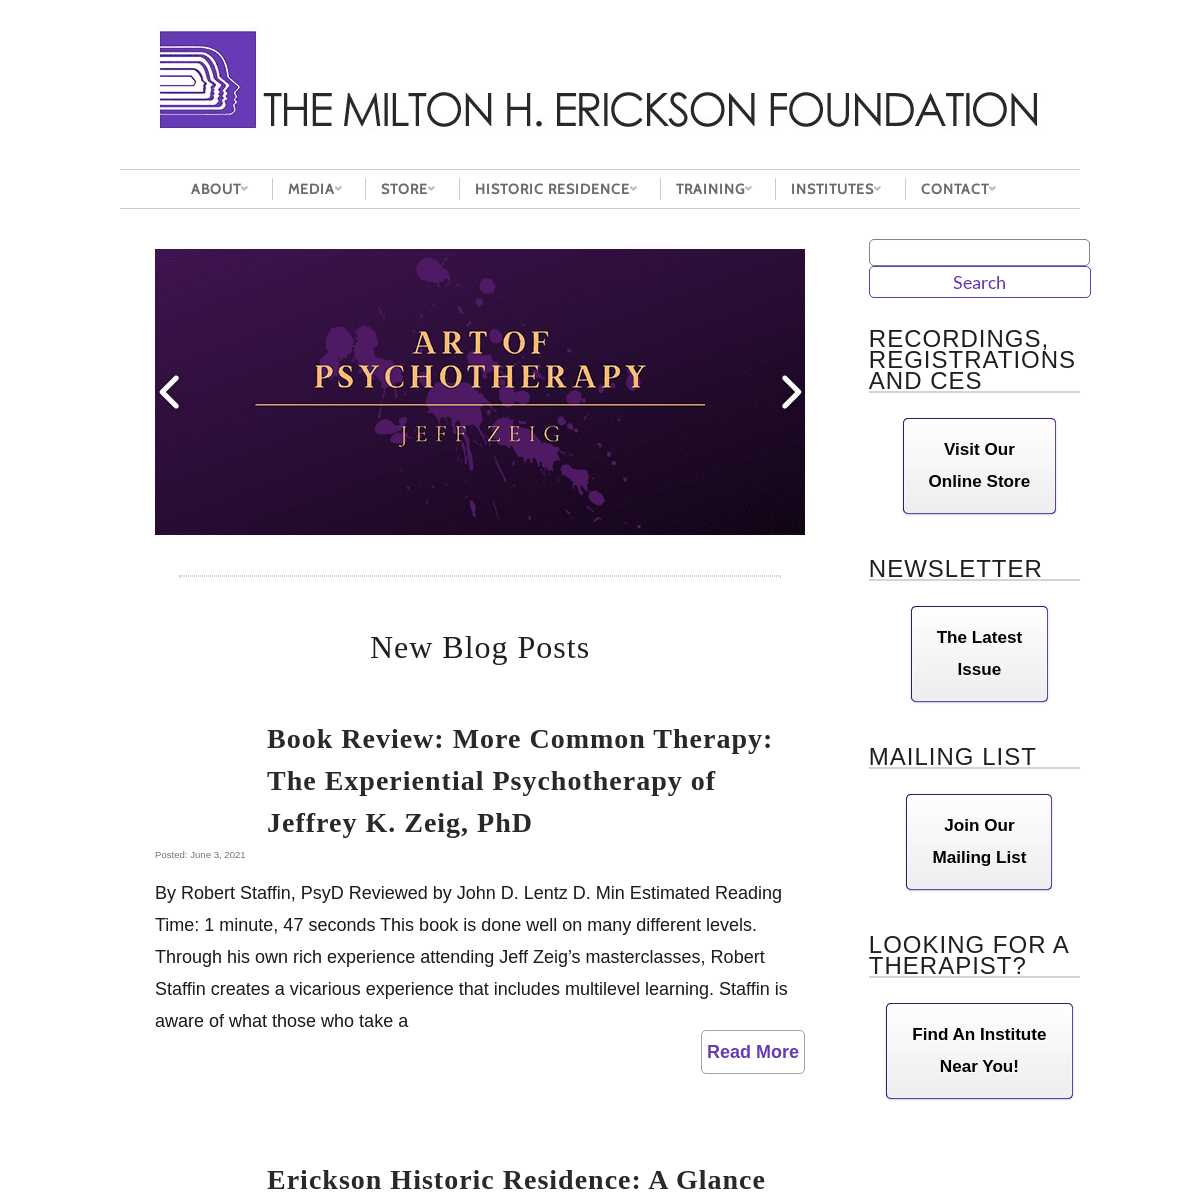 A complete backup of https://erickson-foundation.org